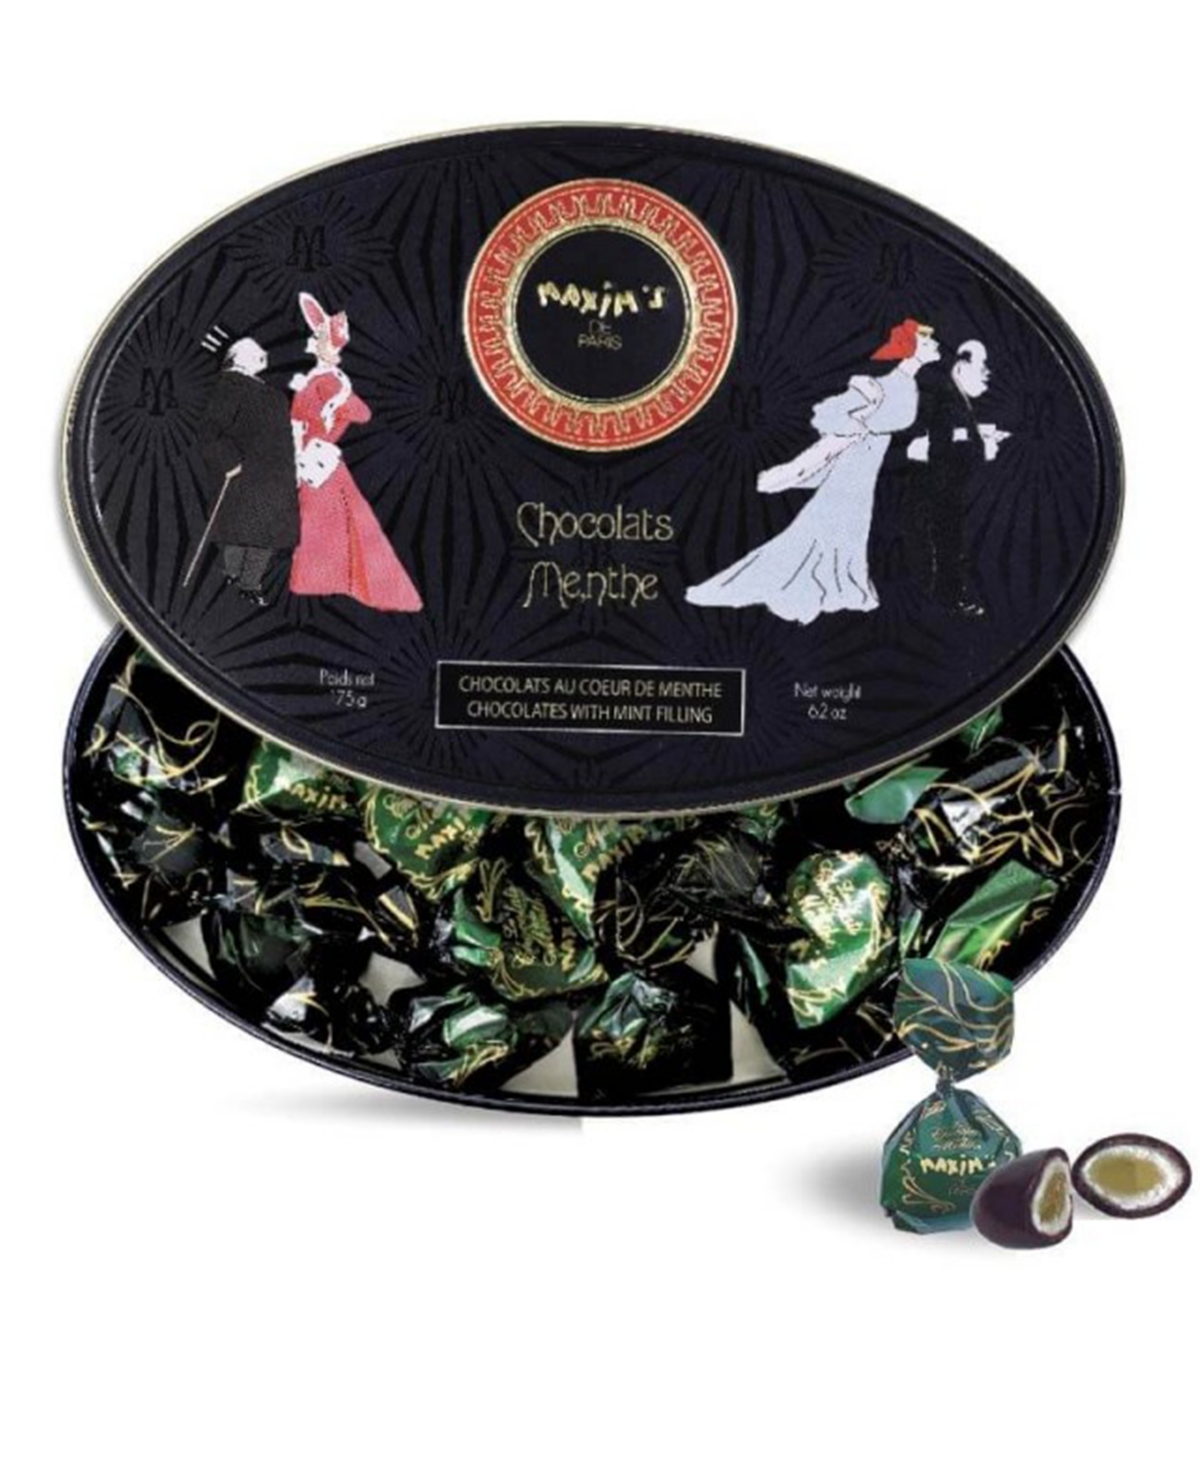 Maxim's De Paris Belle Epoque Tin Box Filled With Chocolate Covered Mints In No Color